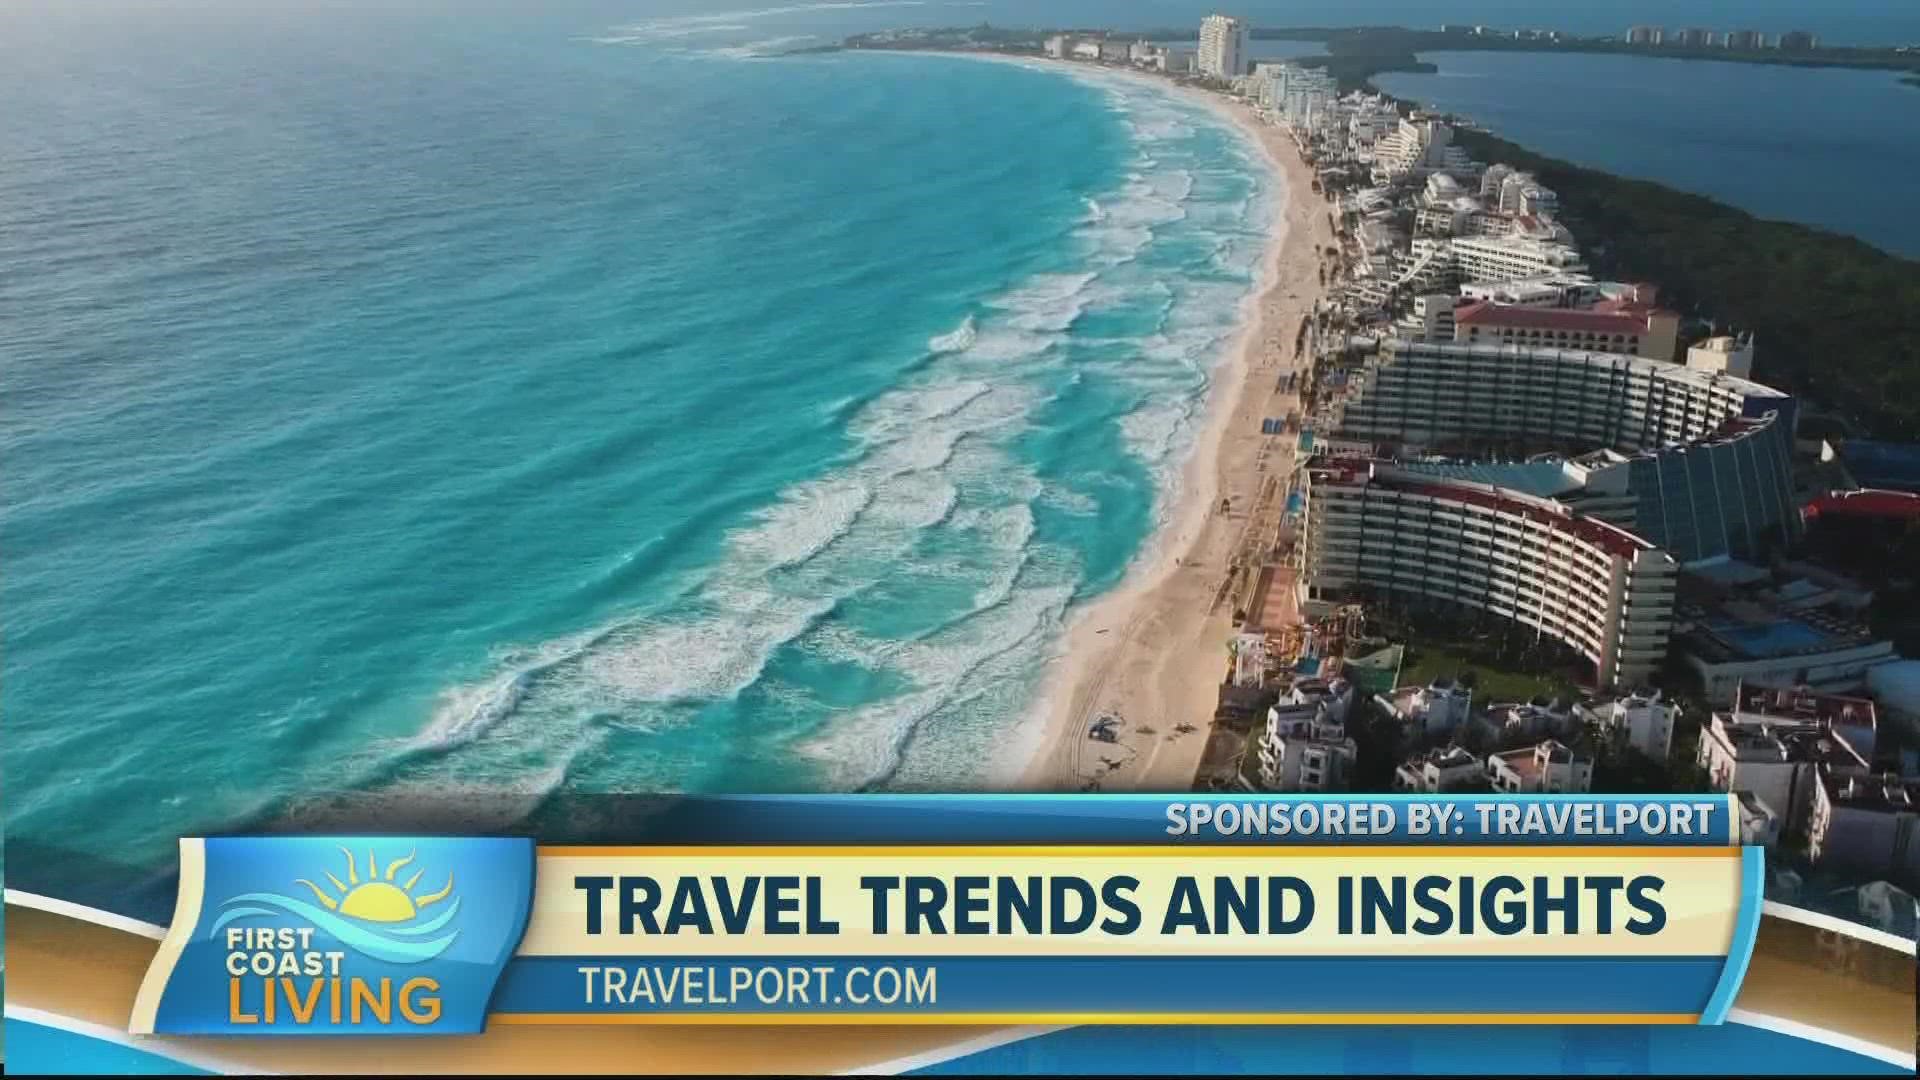 The Chief Marketing Officer for Travelport, Jen Catto shares trends and insights on destinations travelers want to visit this summer.